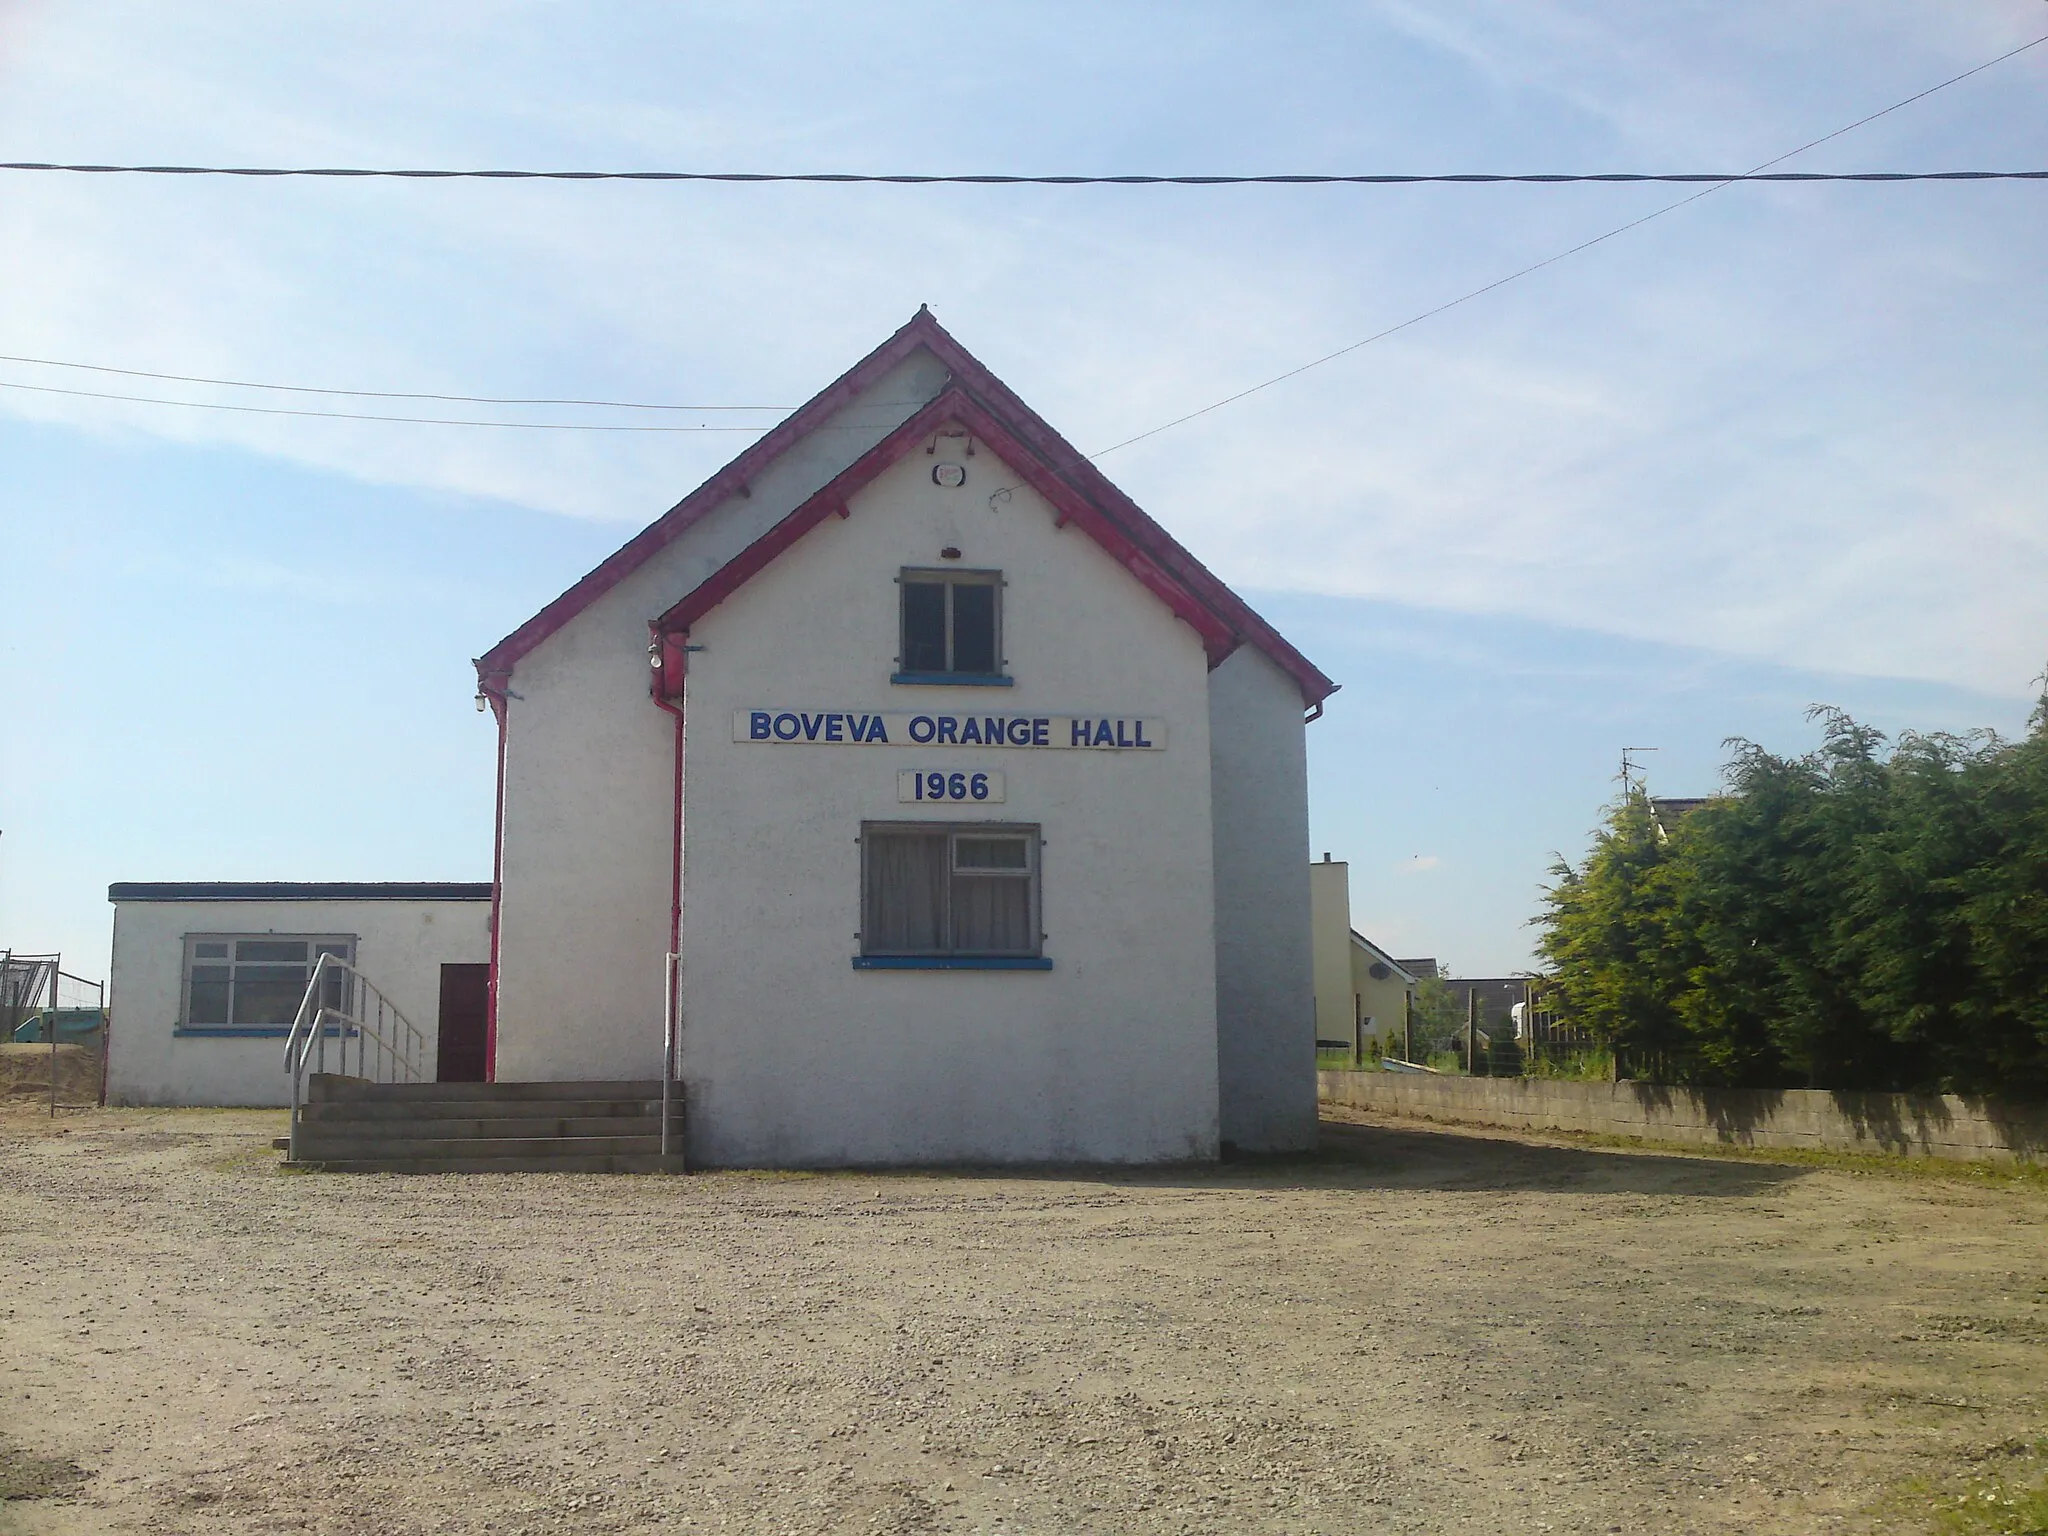 Photo showing: Boveva Orange Hall in Burnfoot,a small village 3 miles from Dungiven.